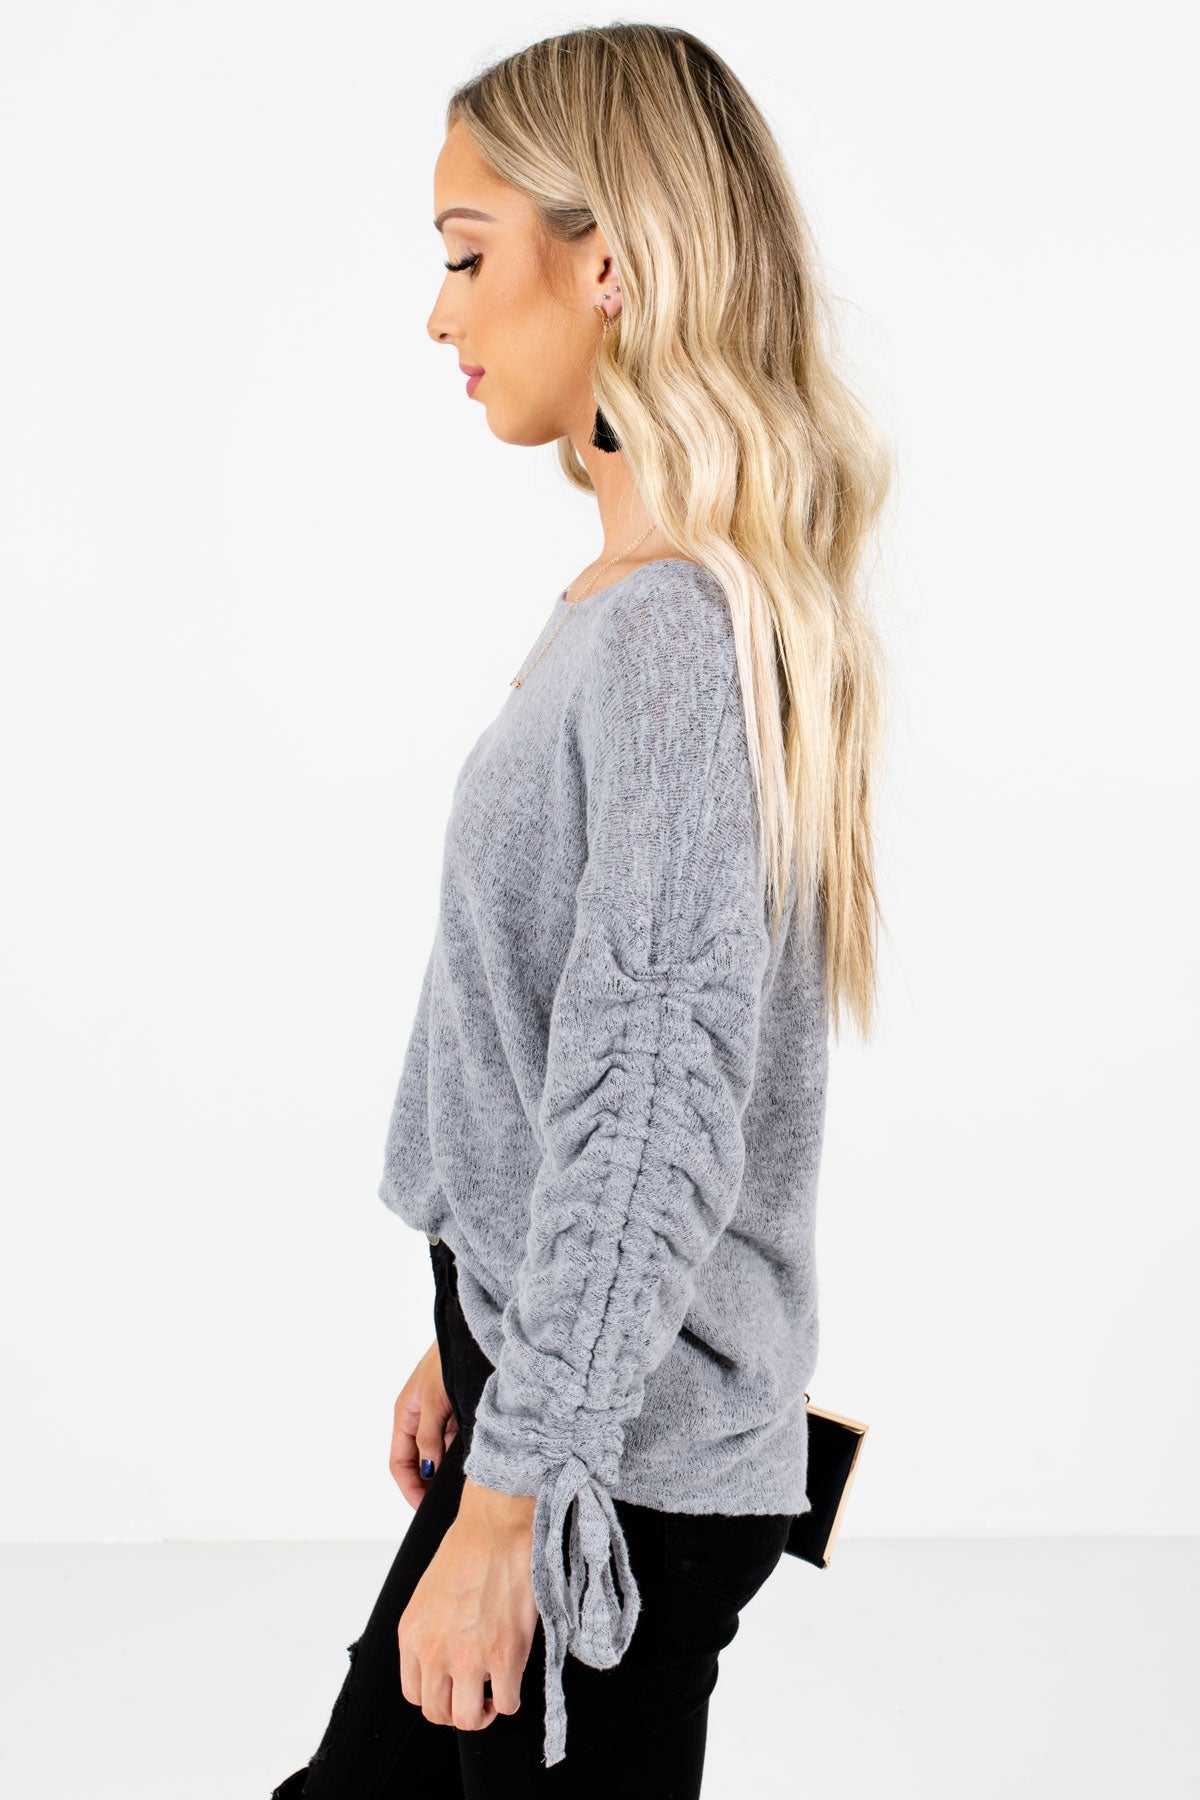 Heather Gray Warm and Cozy Boutique Tops for Women